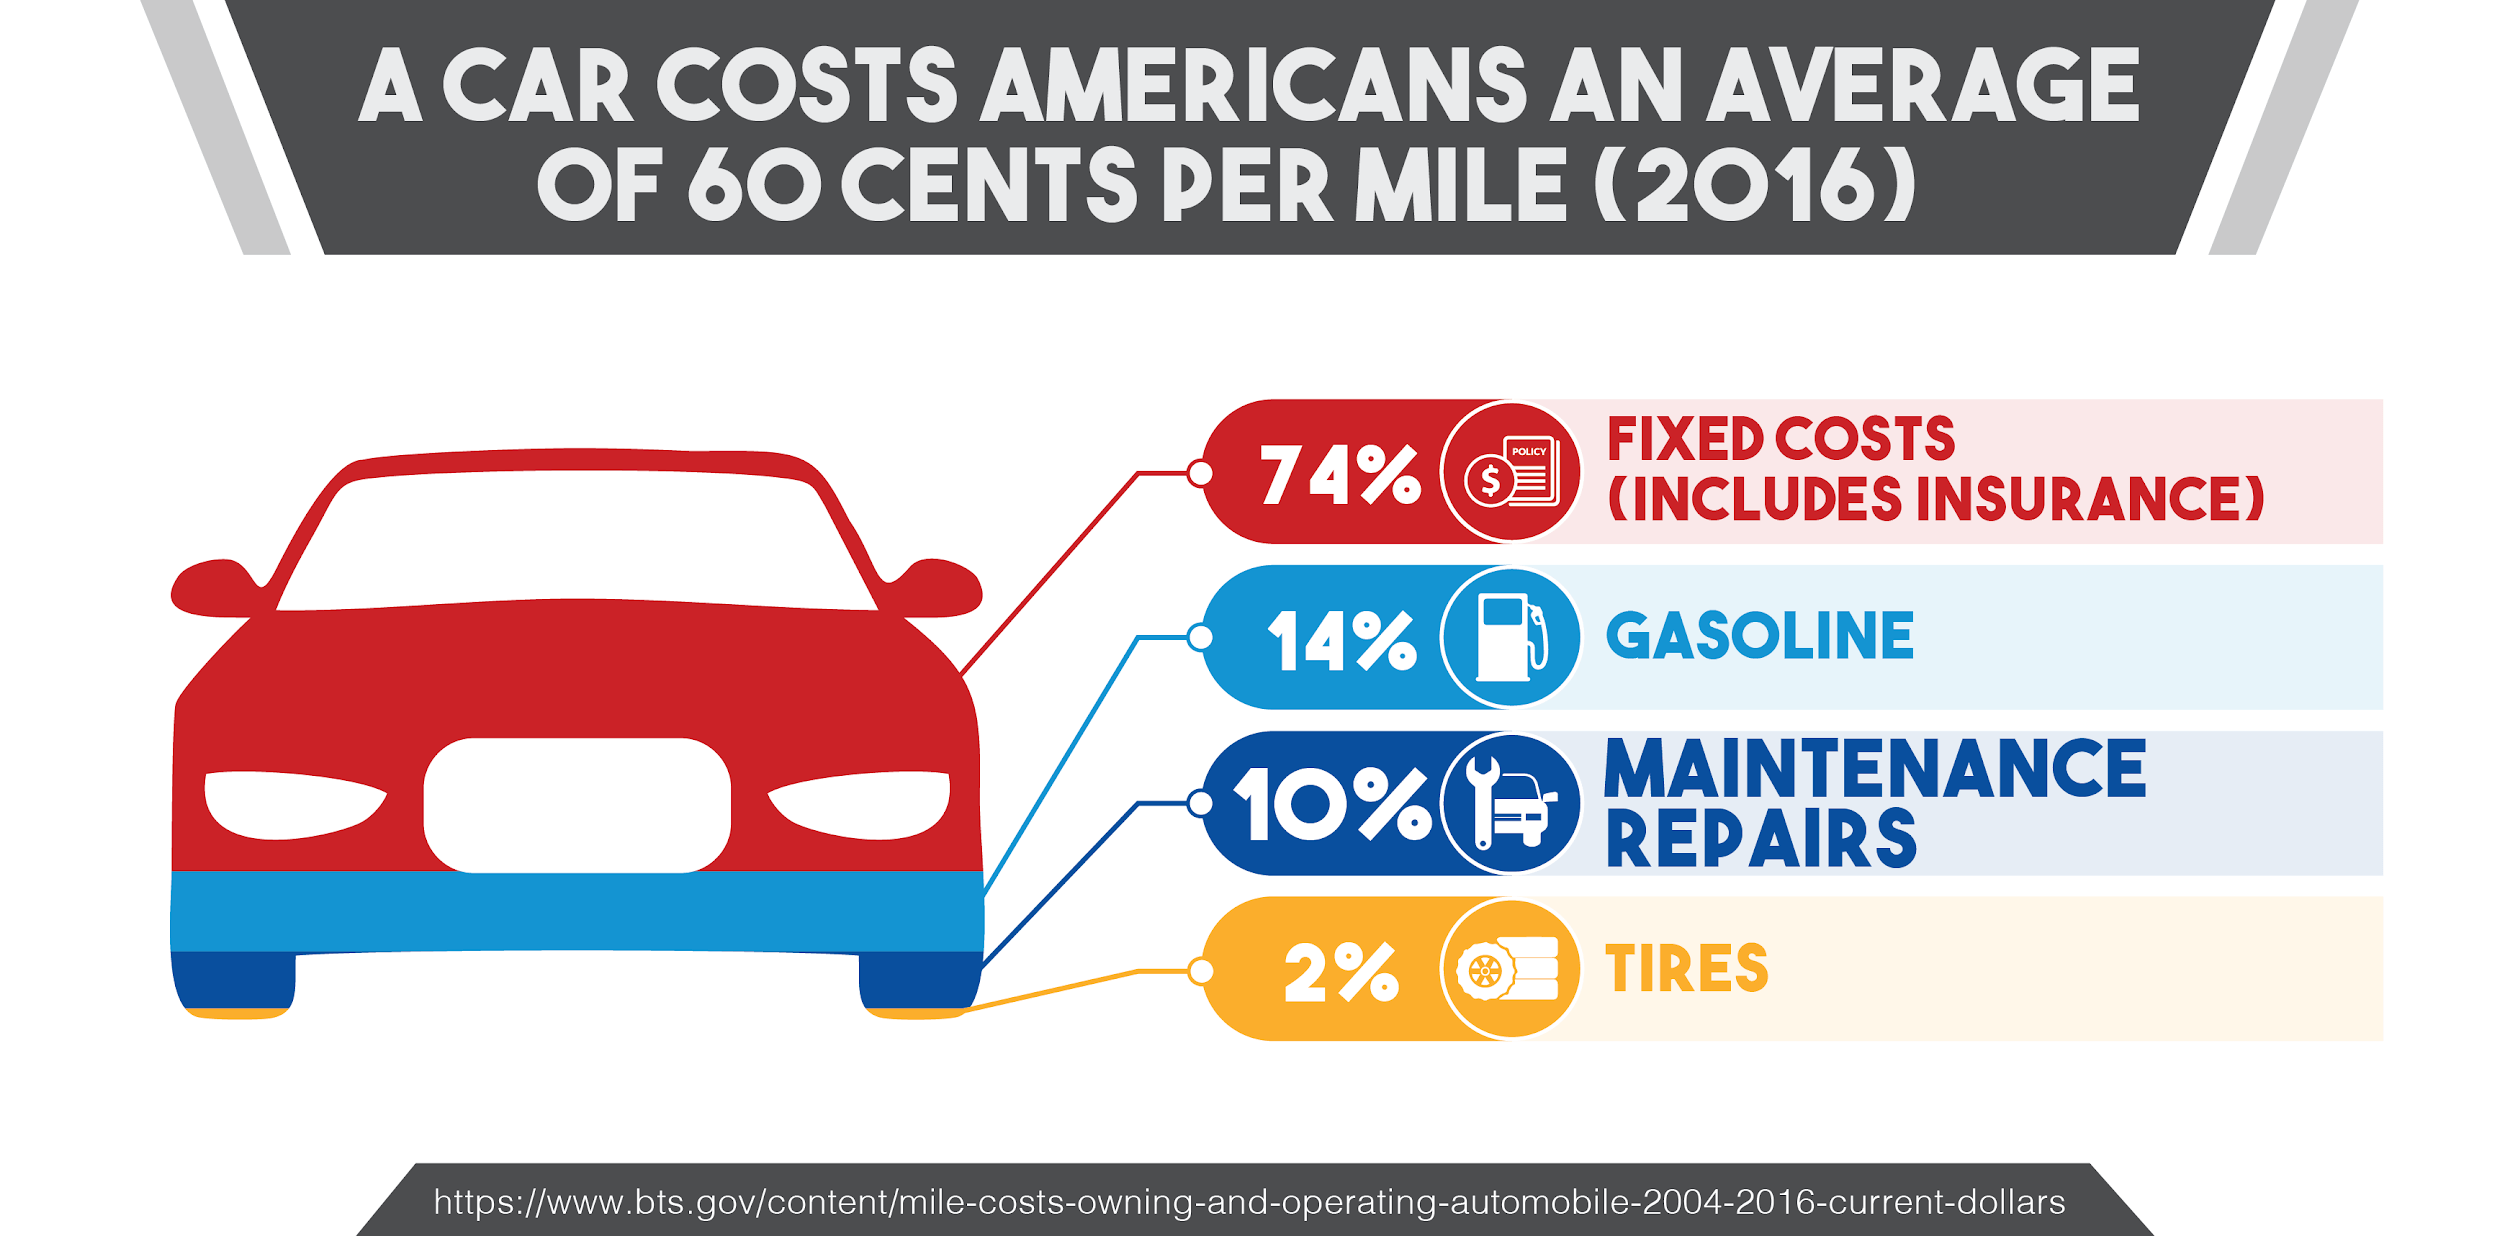 A Car Costs Americans an Average of 60 Cents Per-Mile